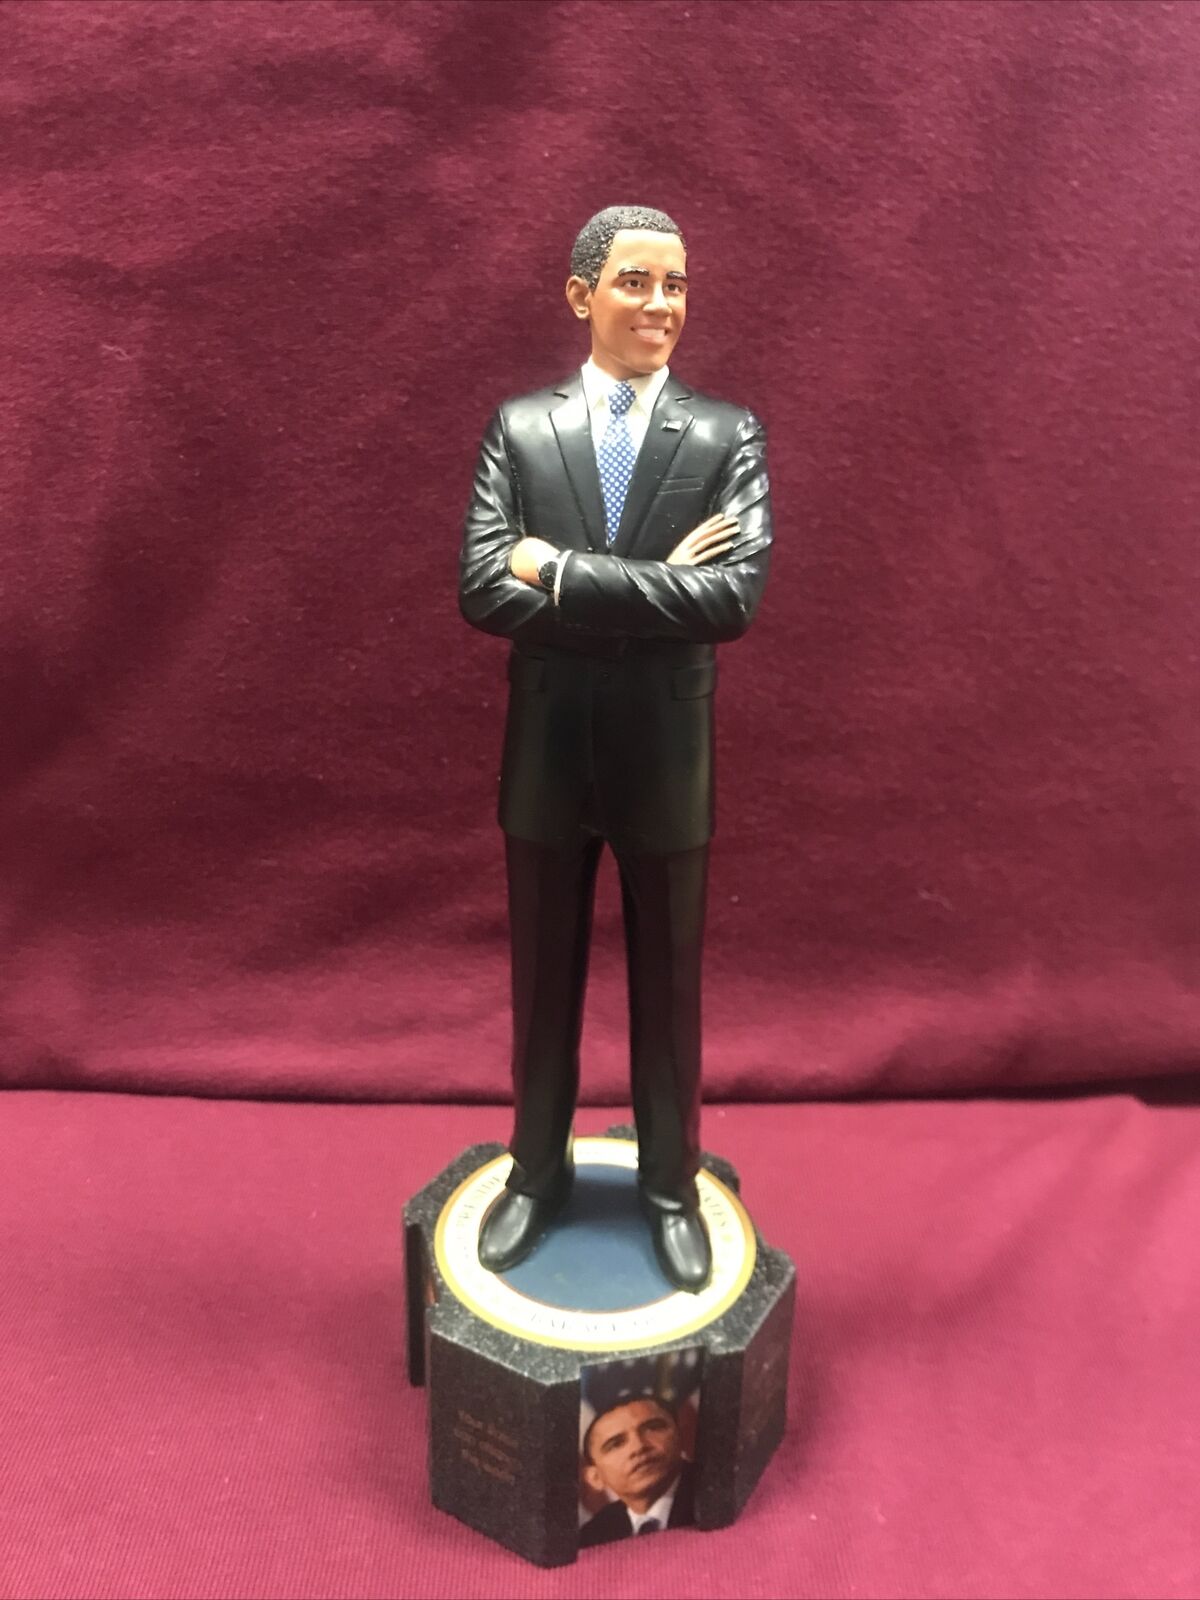 President Obama Limited Edition Figurine by Keith Mallet, Hamilton Collection